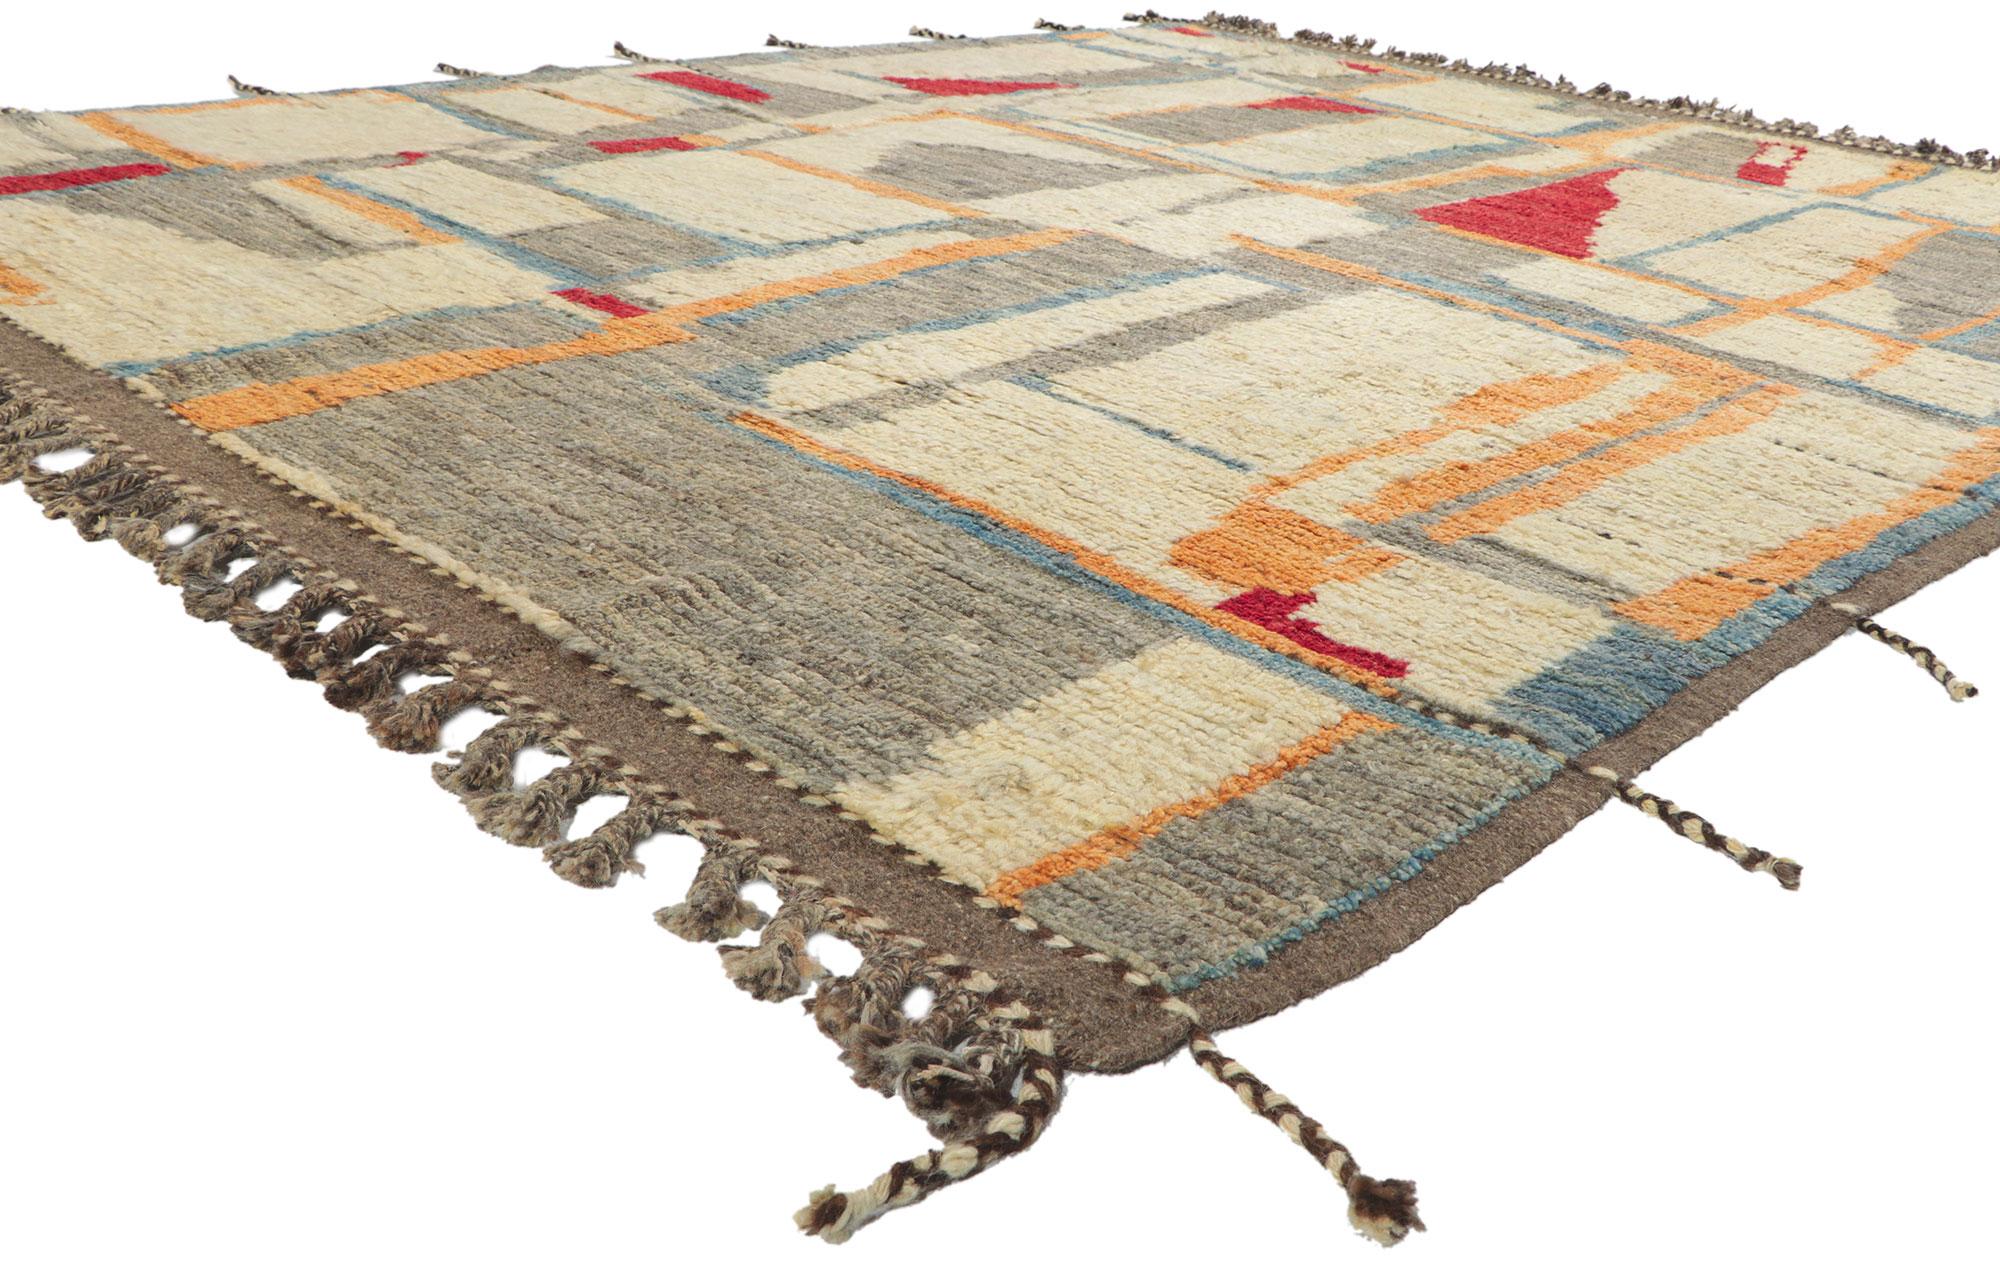 ​80723 Modern Bauhaus Moroccan Rug, 08'04 x 10'03.
Abstract Cubism meets ​Holistic Bauhaus in this hand knotted wool modern Moroccan area rug. Embark on a journey of transformation and fashion with this Moroccan style rug. Its intriguing blend of